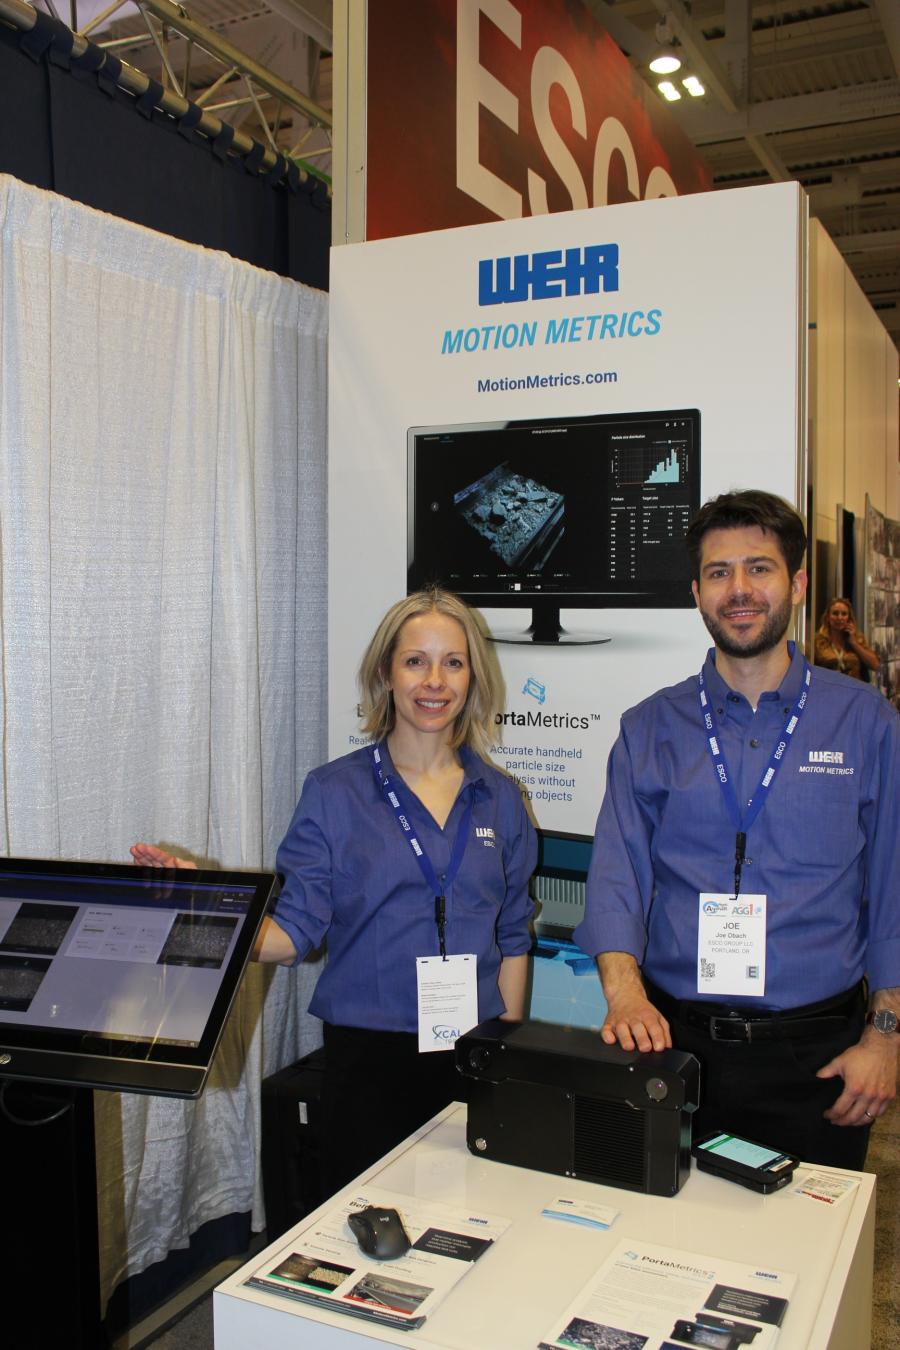 Jocelyn Froehlich, North American sales leader, and Joe Obach, commercial manager, both of WEIR Motion Metrics, Portland, Ore., which is a technology company that uses its expertise in artificial intelligence and computer vision to improve mine safety and energy efficiency.